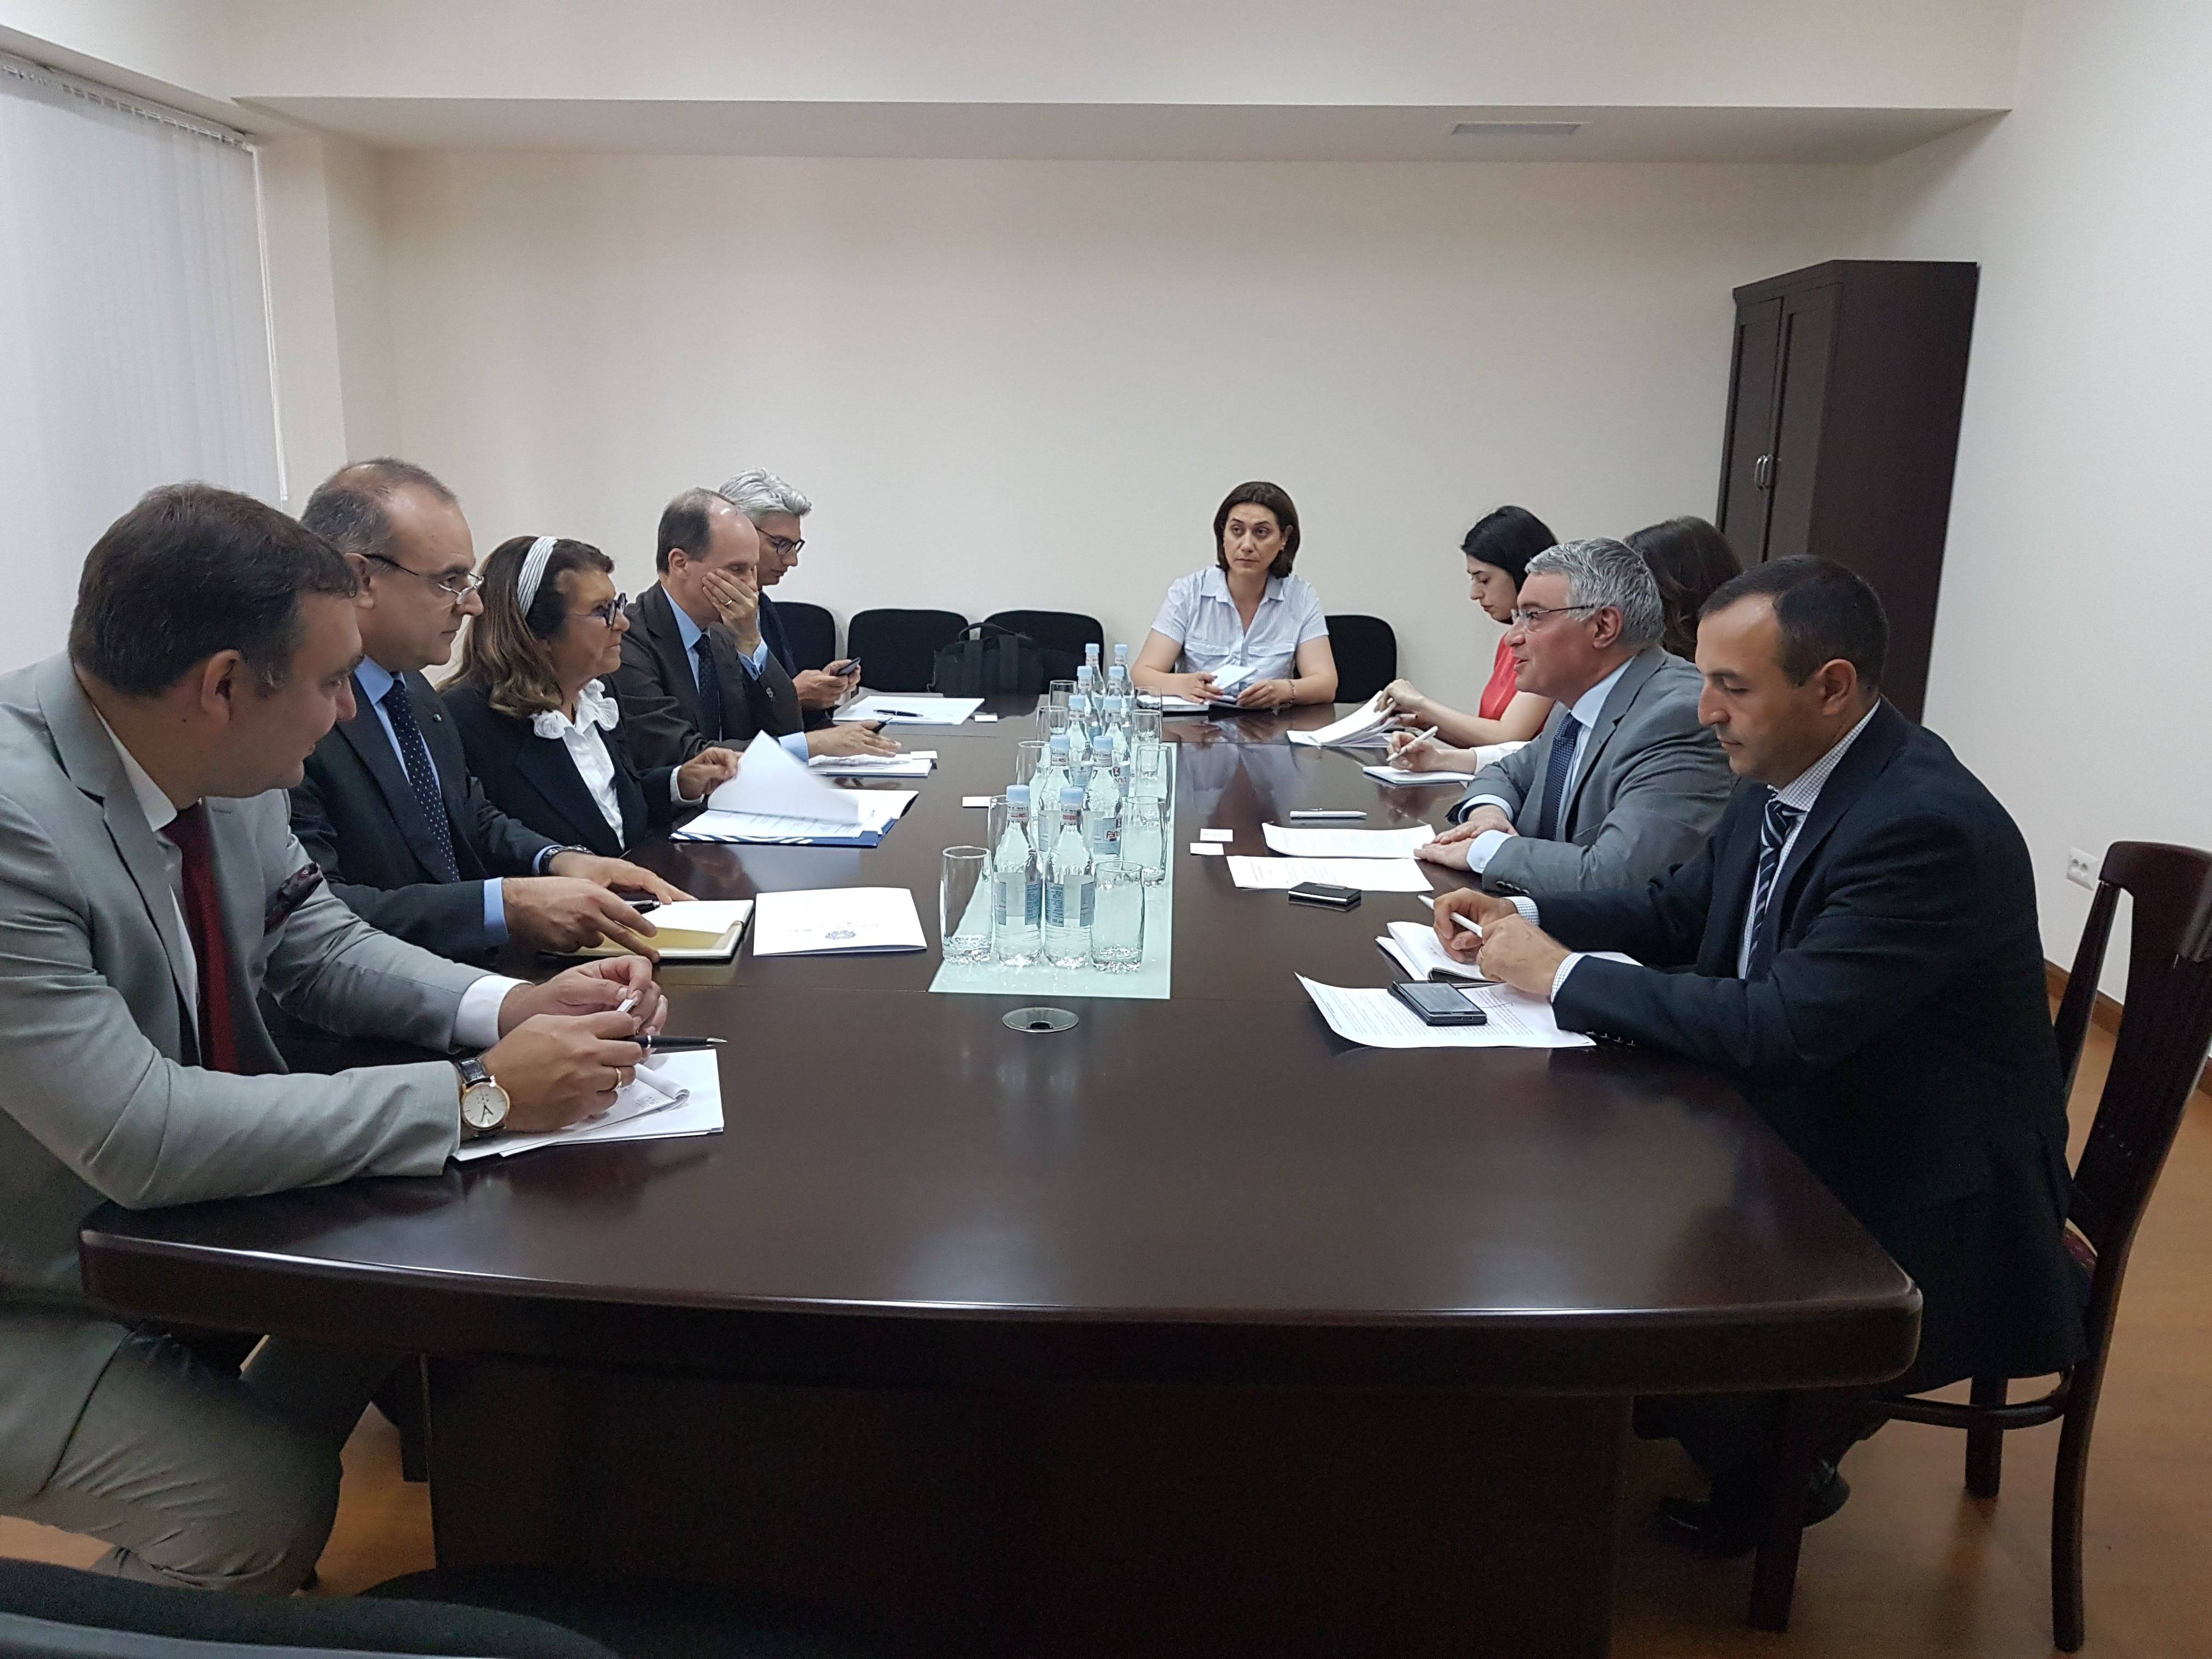 Paola Severino, the Special Representative of the OSCE Chairperson-in-Office on Combating Corruption, visited Armenia